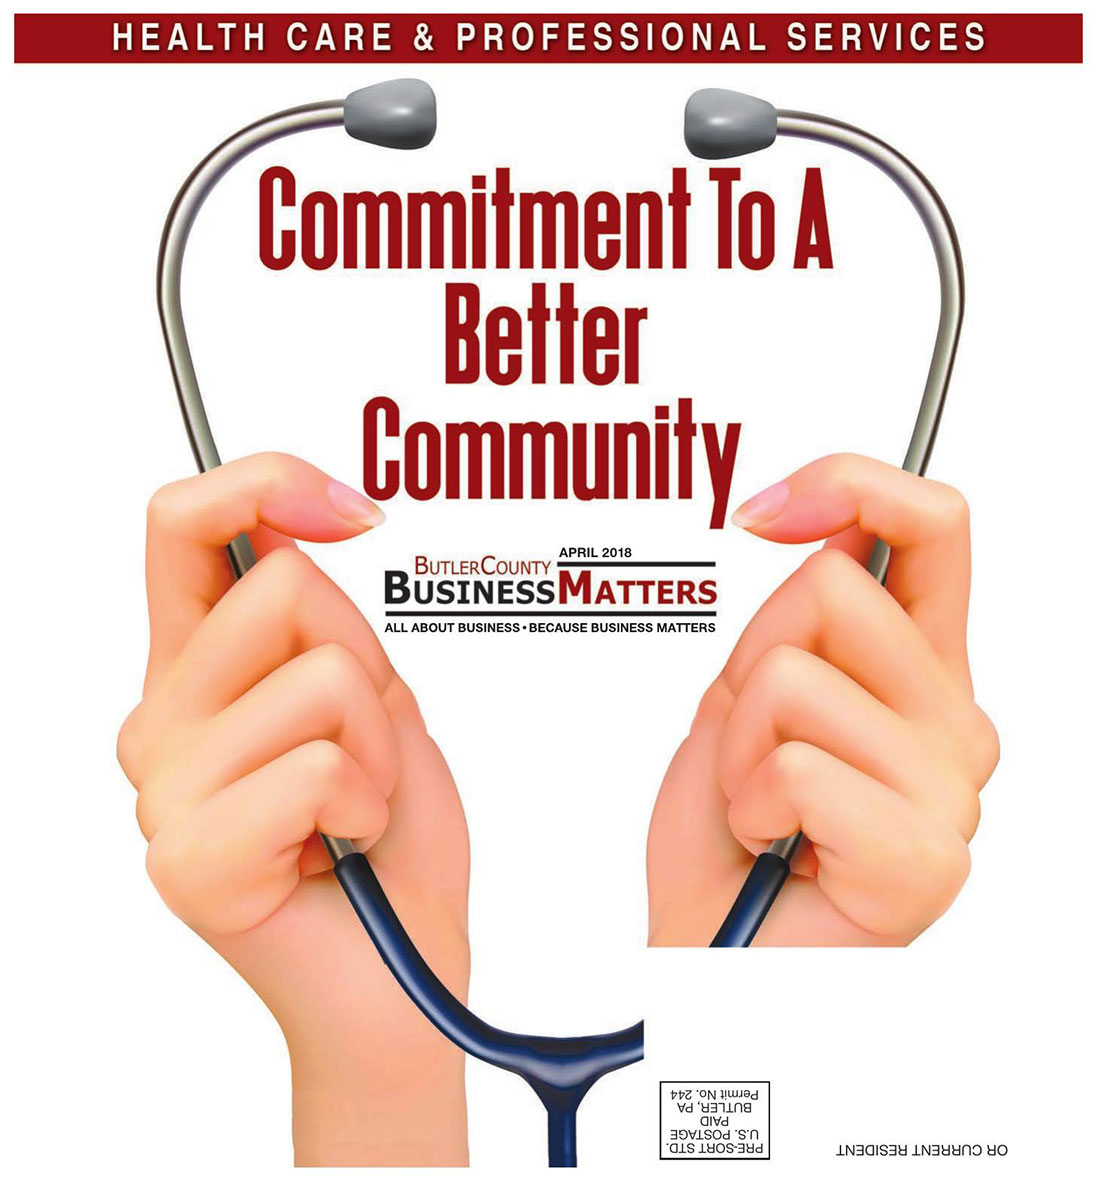 April 2018 - Health Care & Professional Services - Commitment To A Better Community